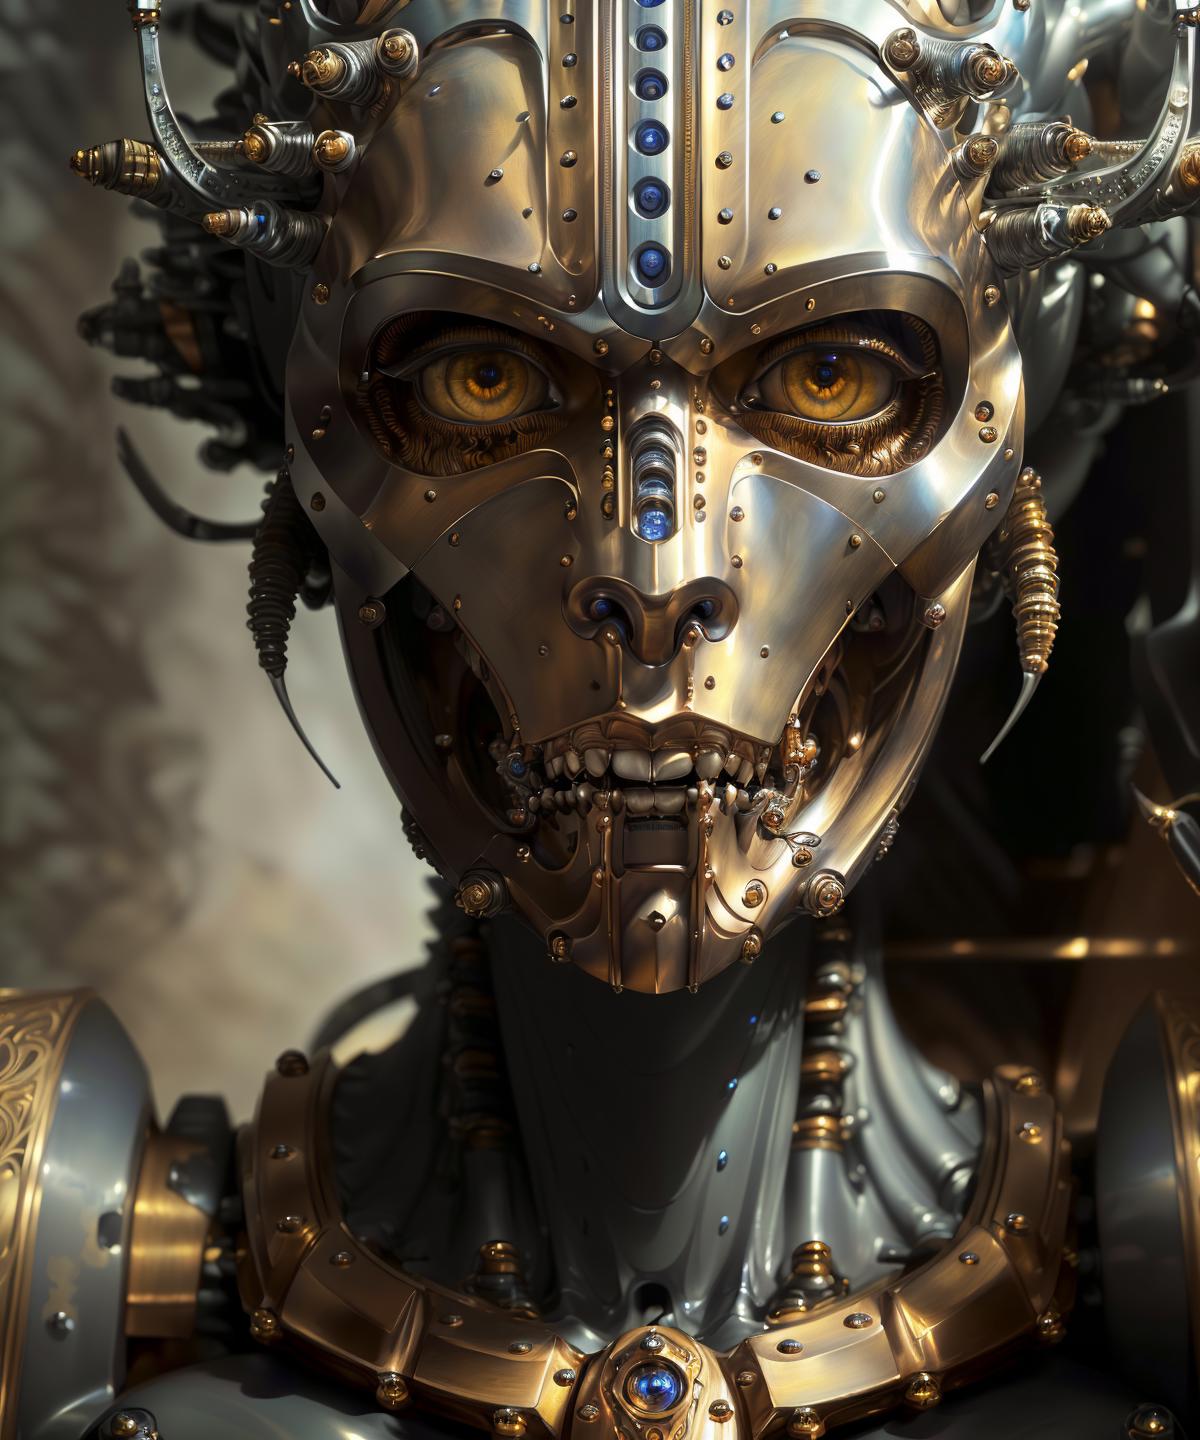 A robot sculpture with a silver face and gold accents.